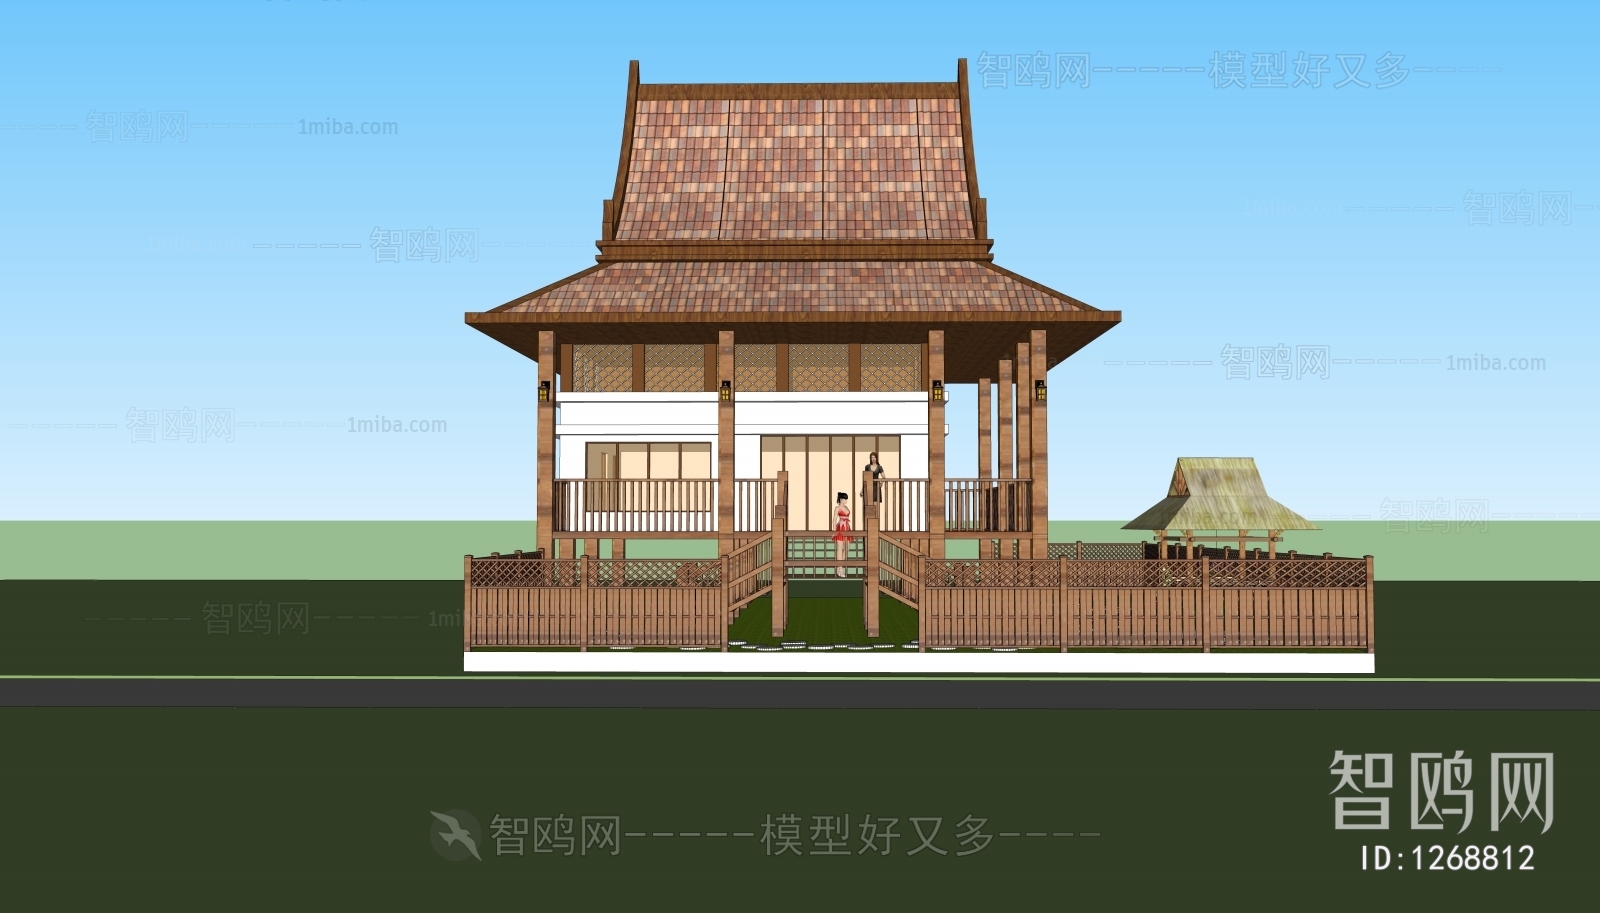 Southeast Asian Style Building Appearance